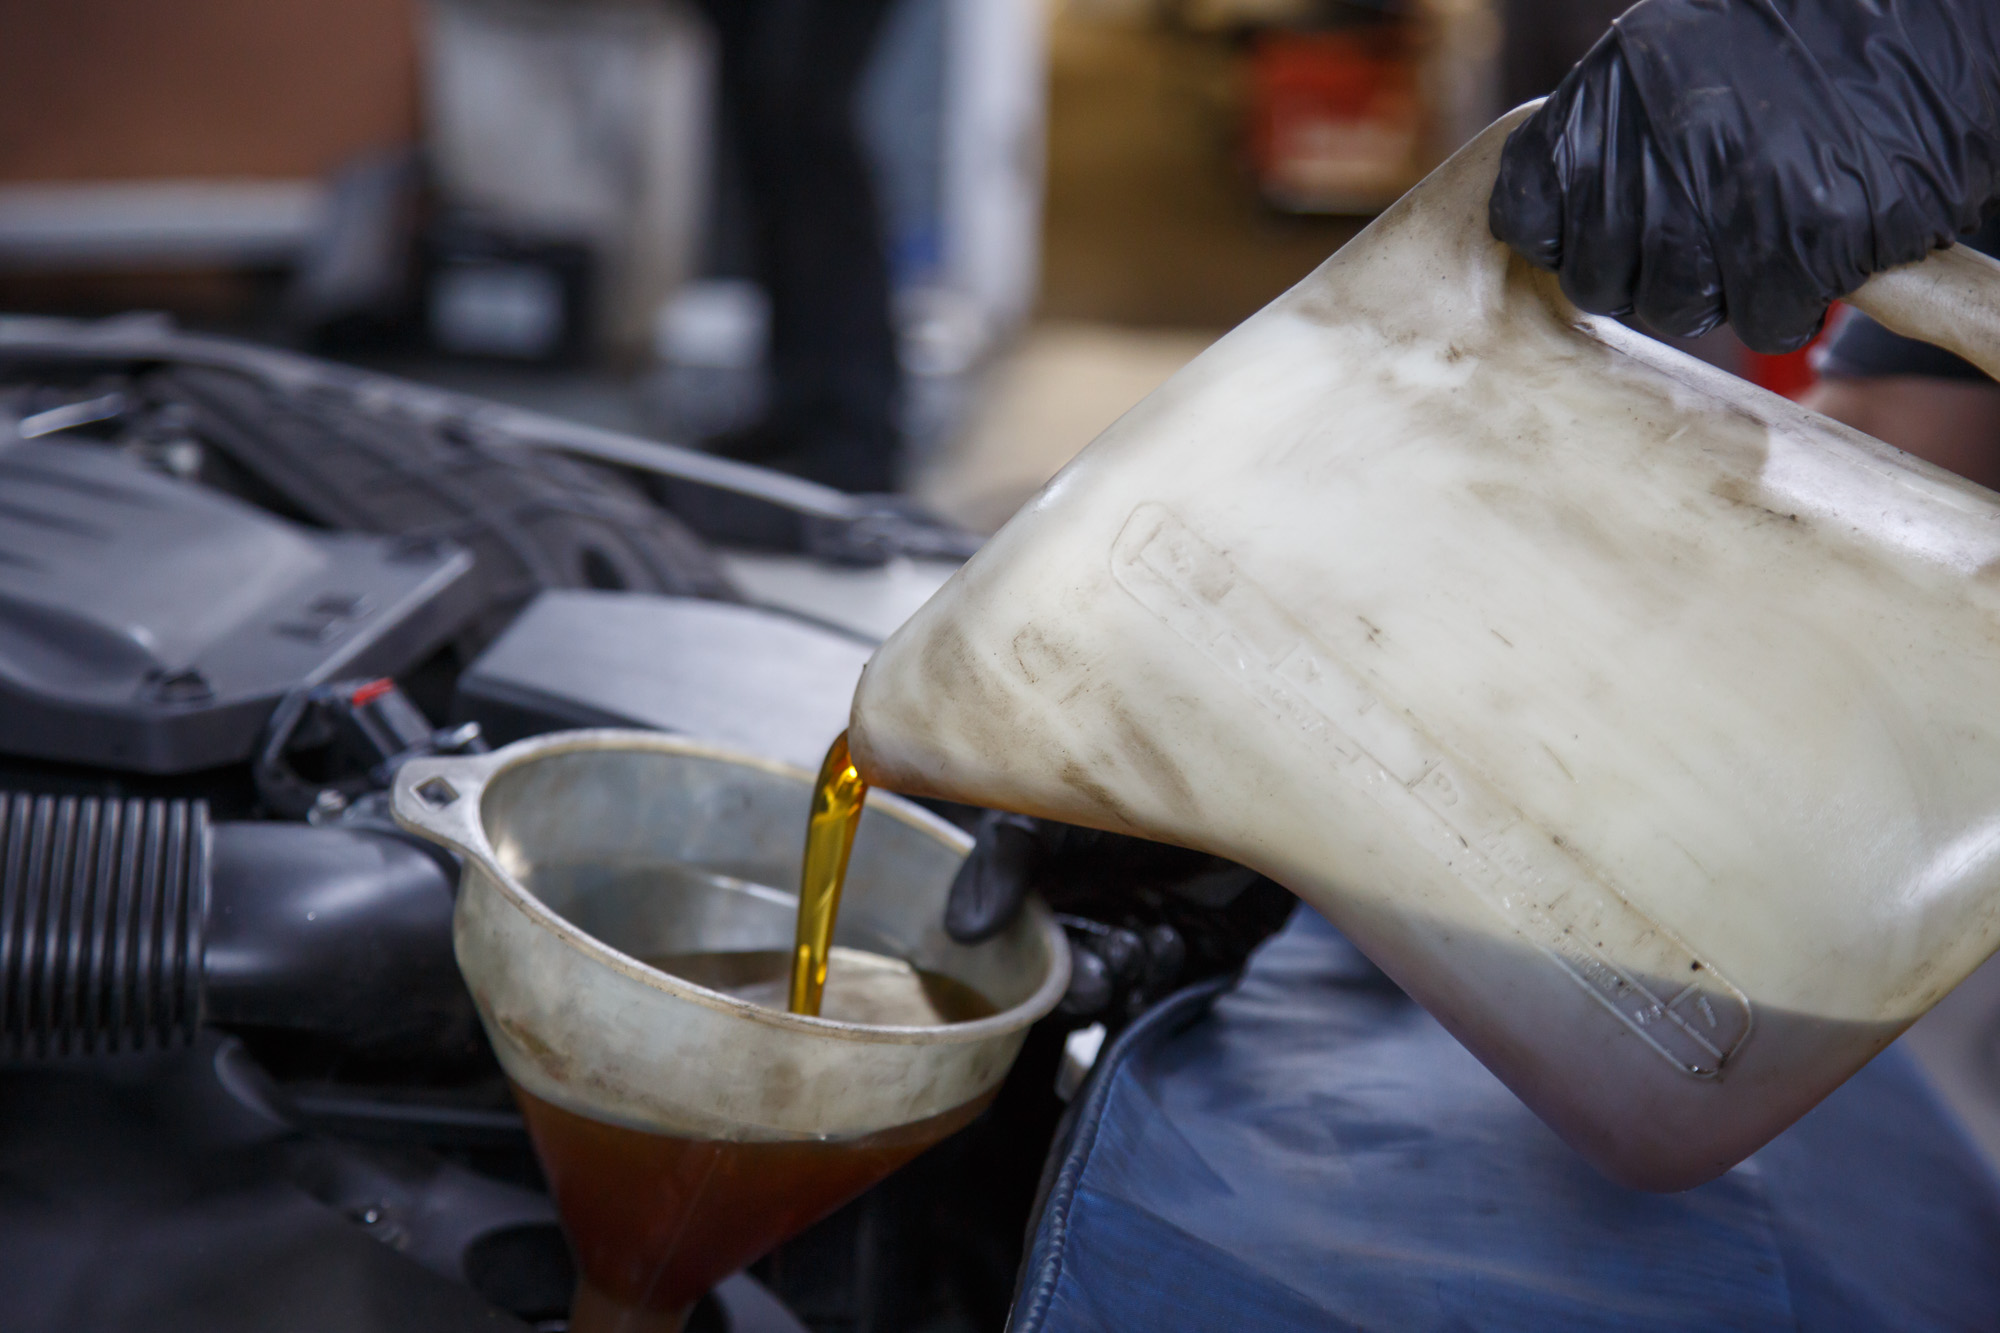 Motor Oil Disposal - (Where To Get Rid Of Waste Oil)